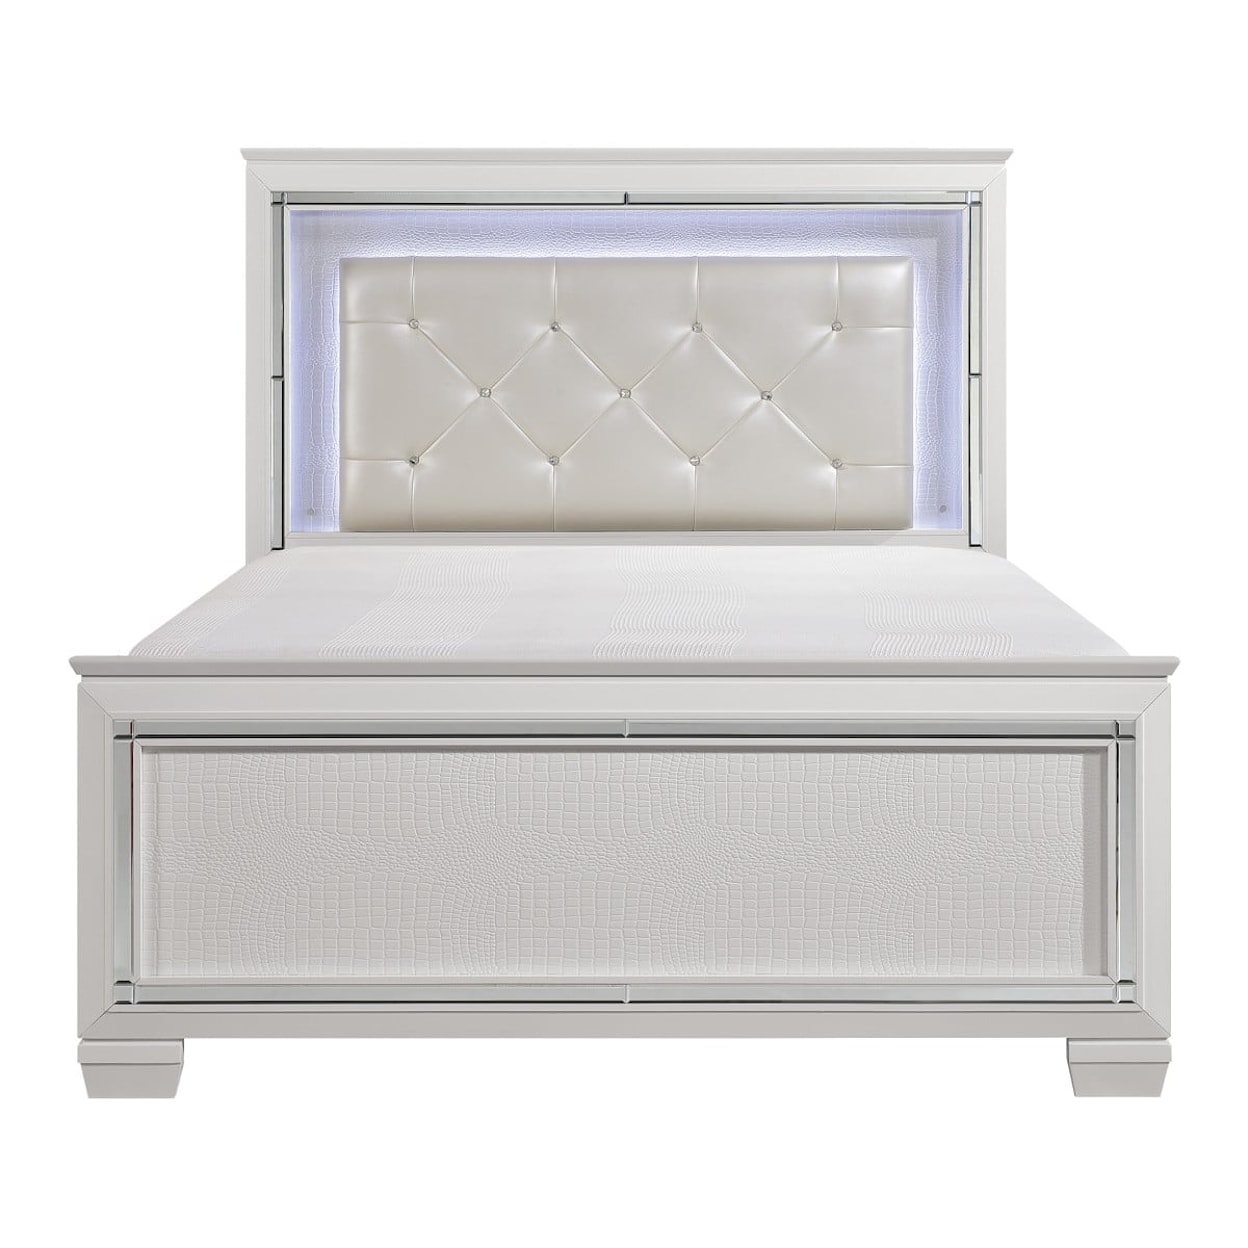 Homelegance Allura Queen Bed with Led Lighting